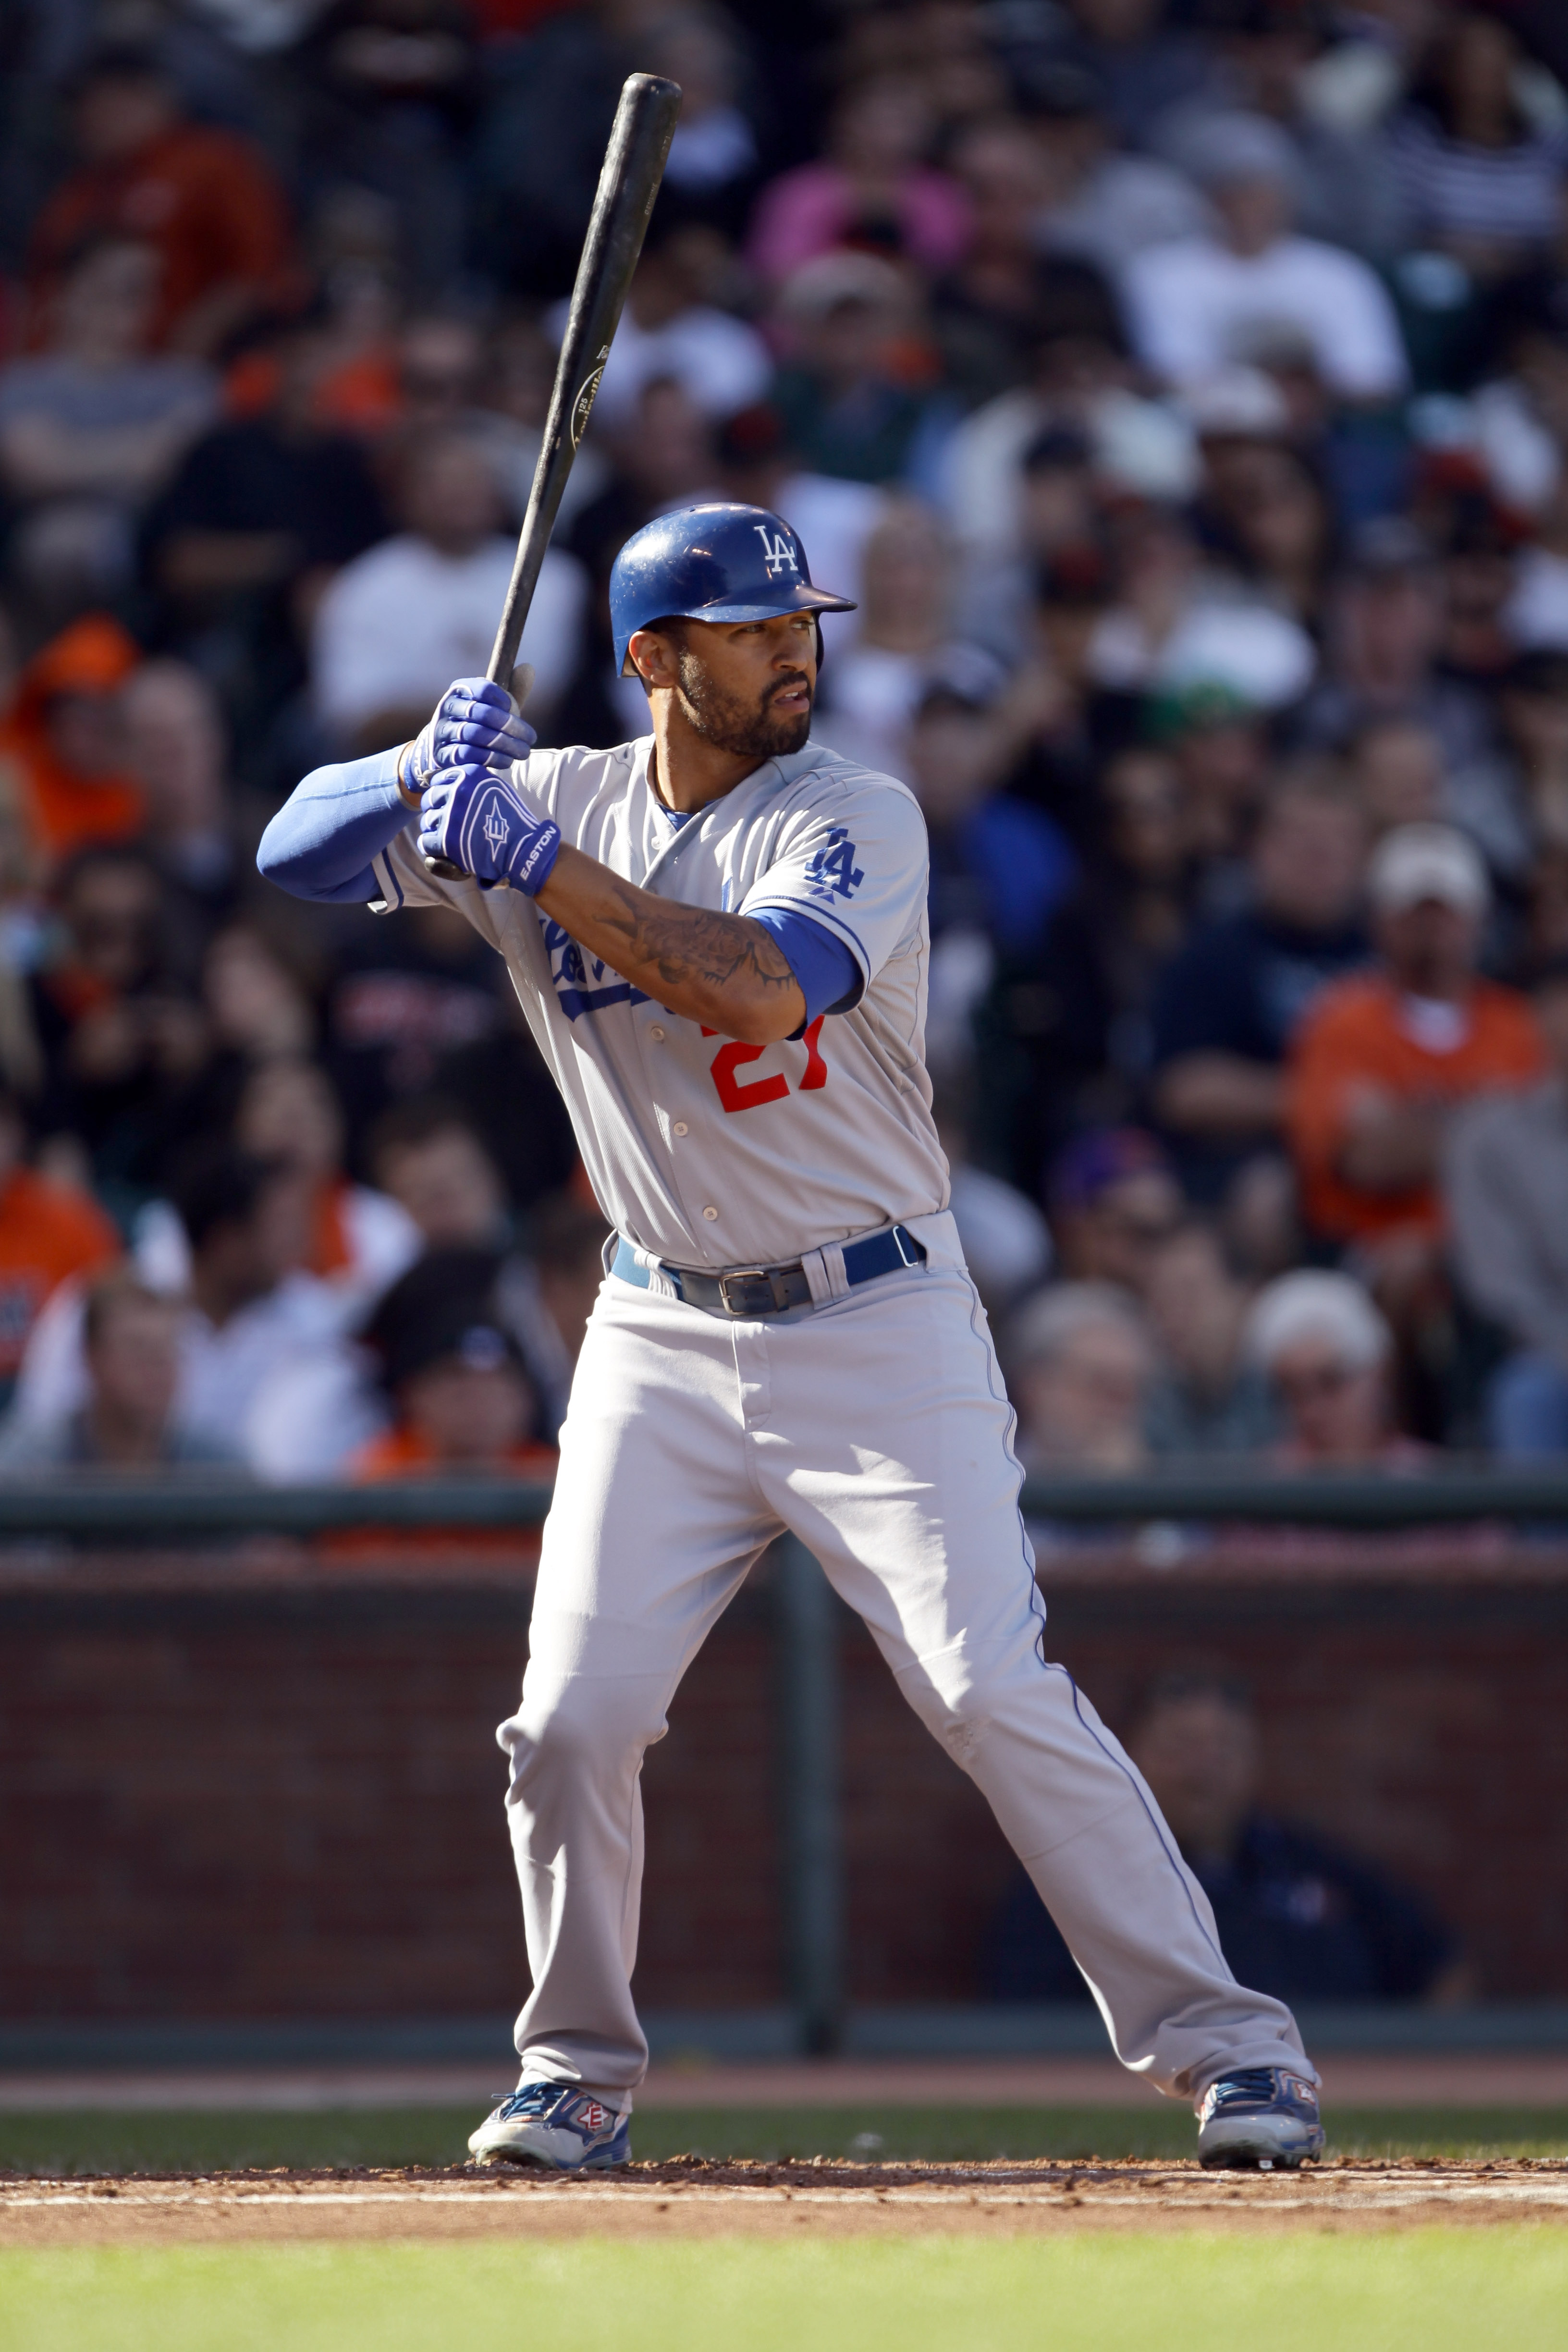 SAN FRANCISCO - AUGUST 01:  Matt Kemp #27 of the Los Angeles Dodgers bats against the San Francisco Giants at AT&T Park on August 1, 2010 in San Francisco, California.  (Photo by Ezra Shaw/Getty Images)